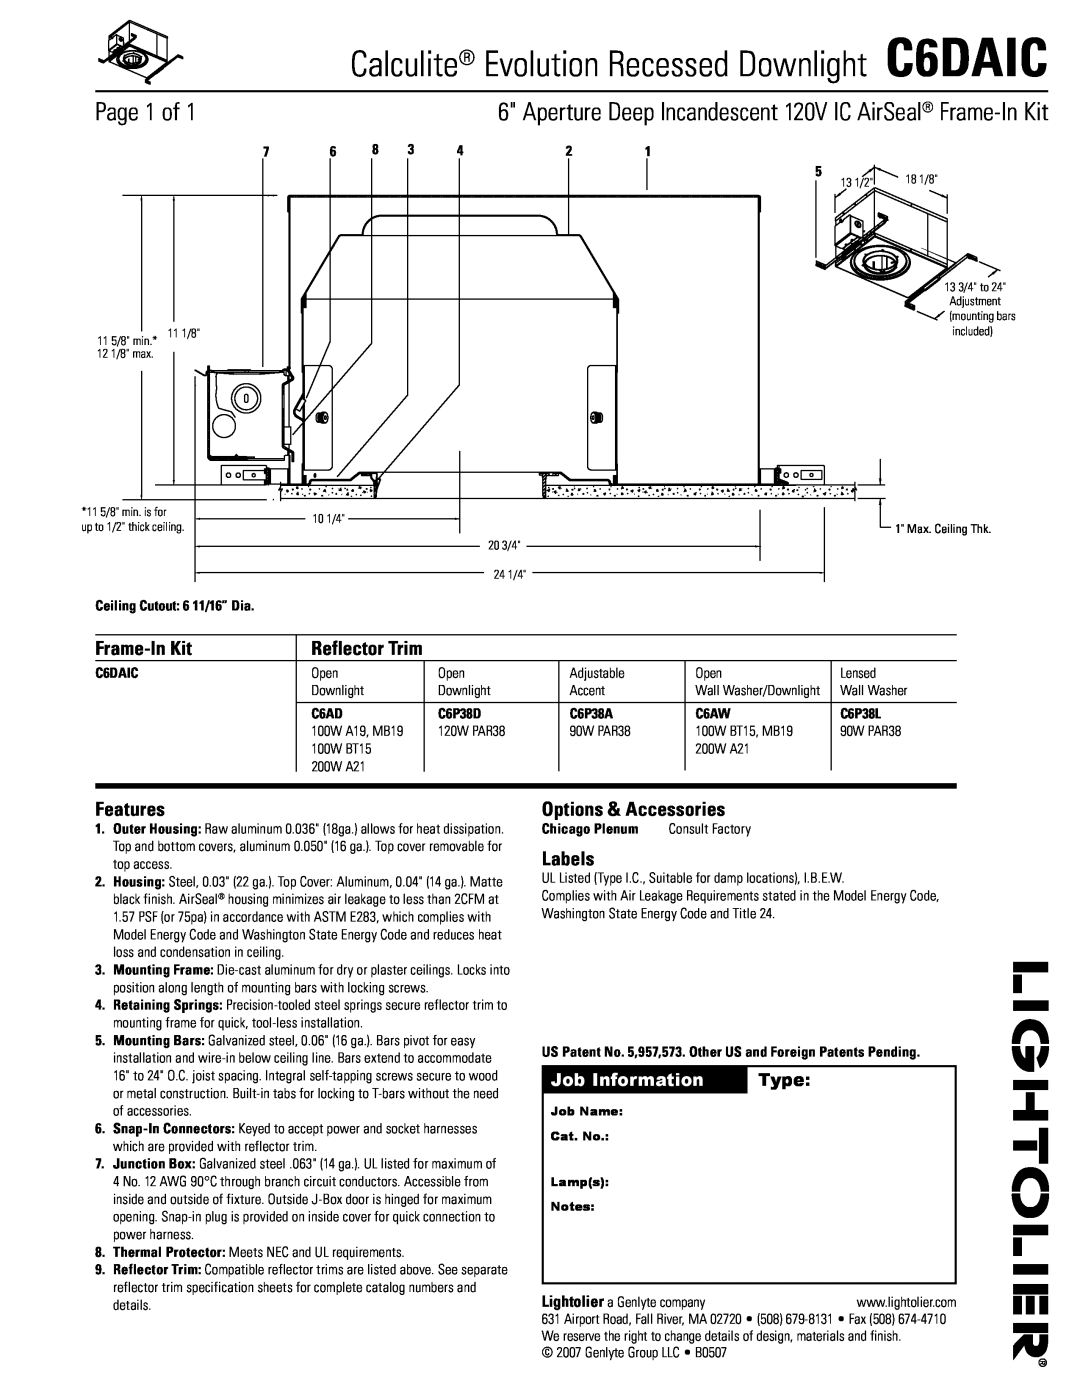 Lightolier specifications Calculite Evolution Recessed Downlight C6DAIC, Page of, Frame-InKit, Features, Labels, Type 